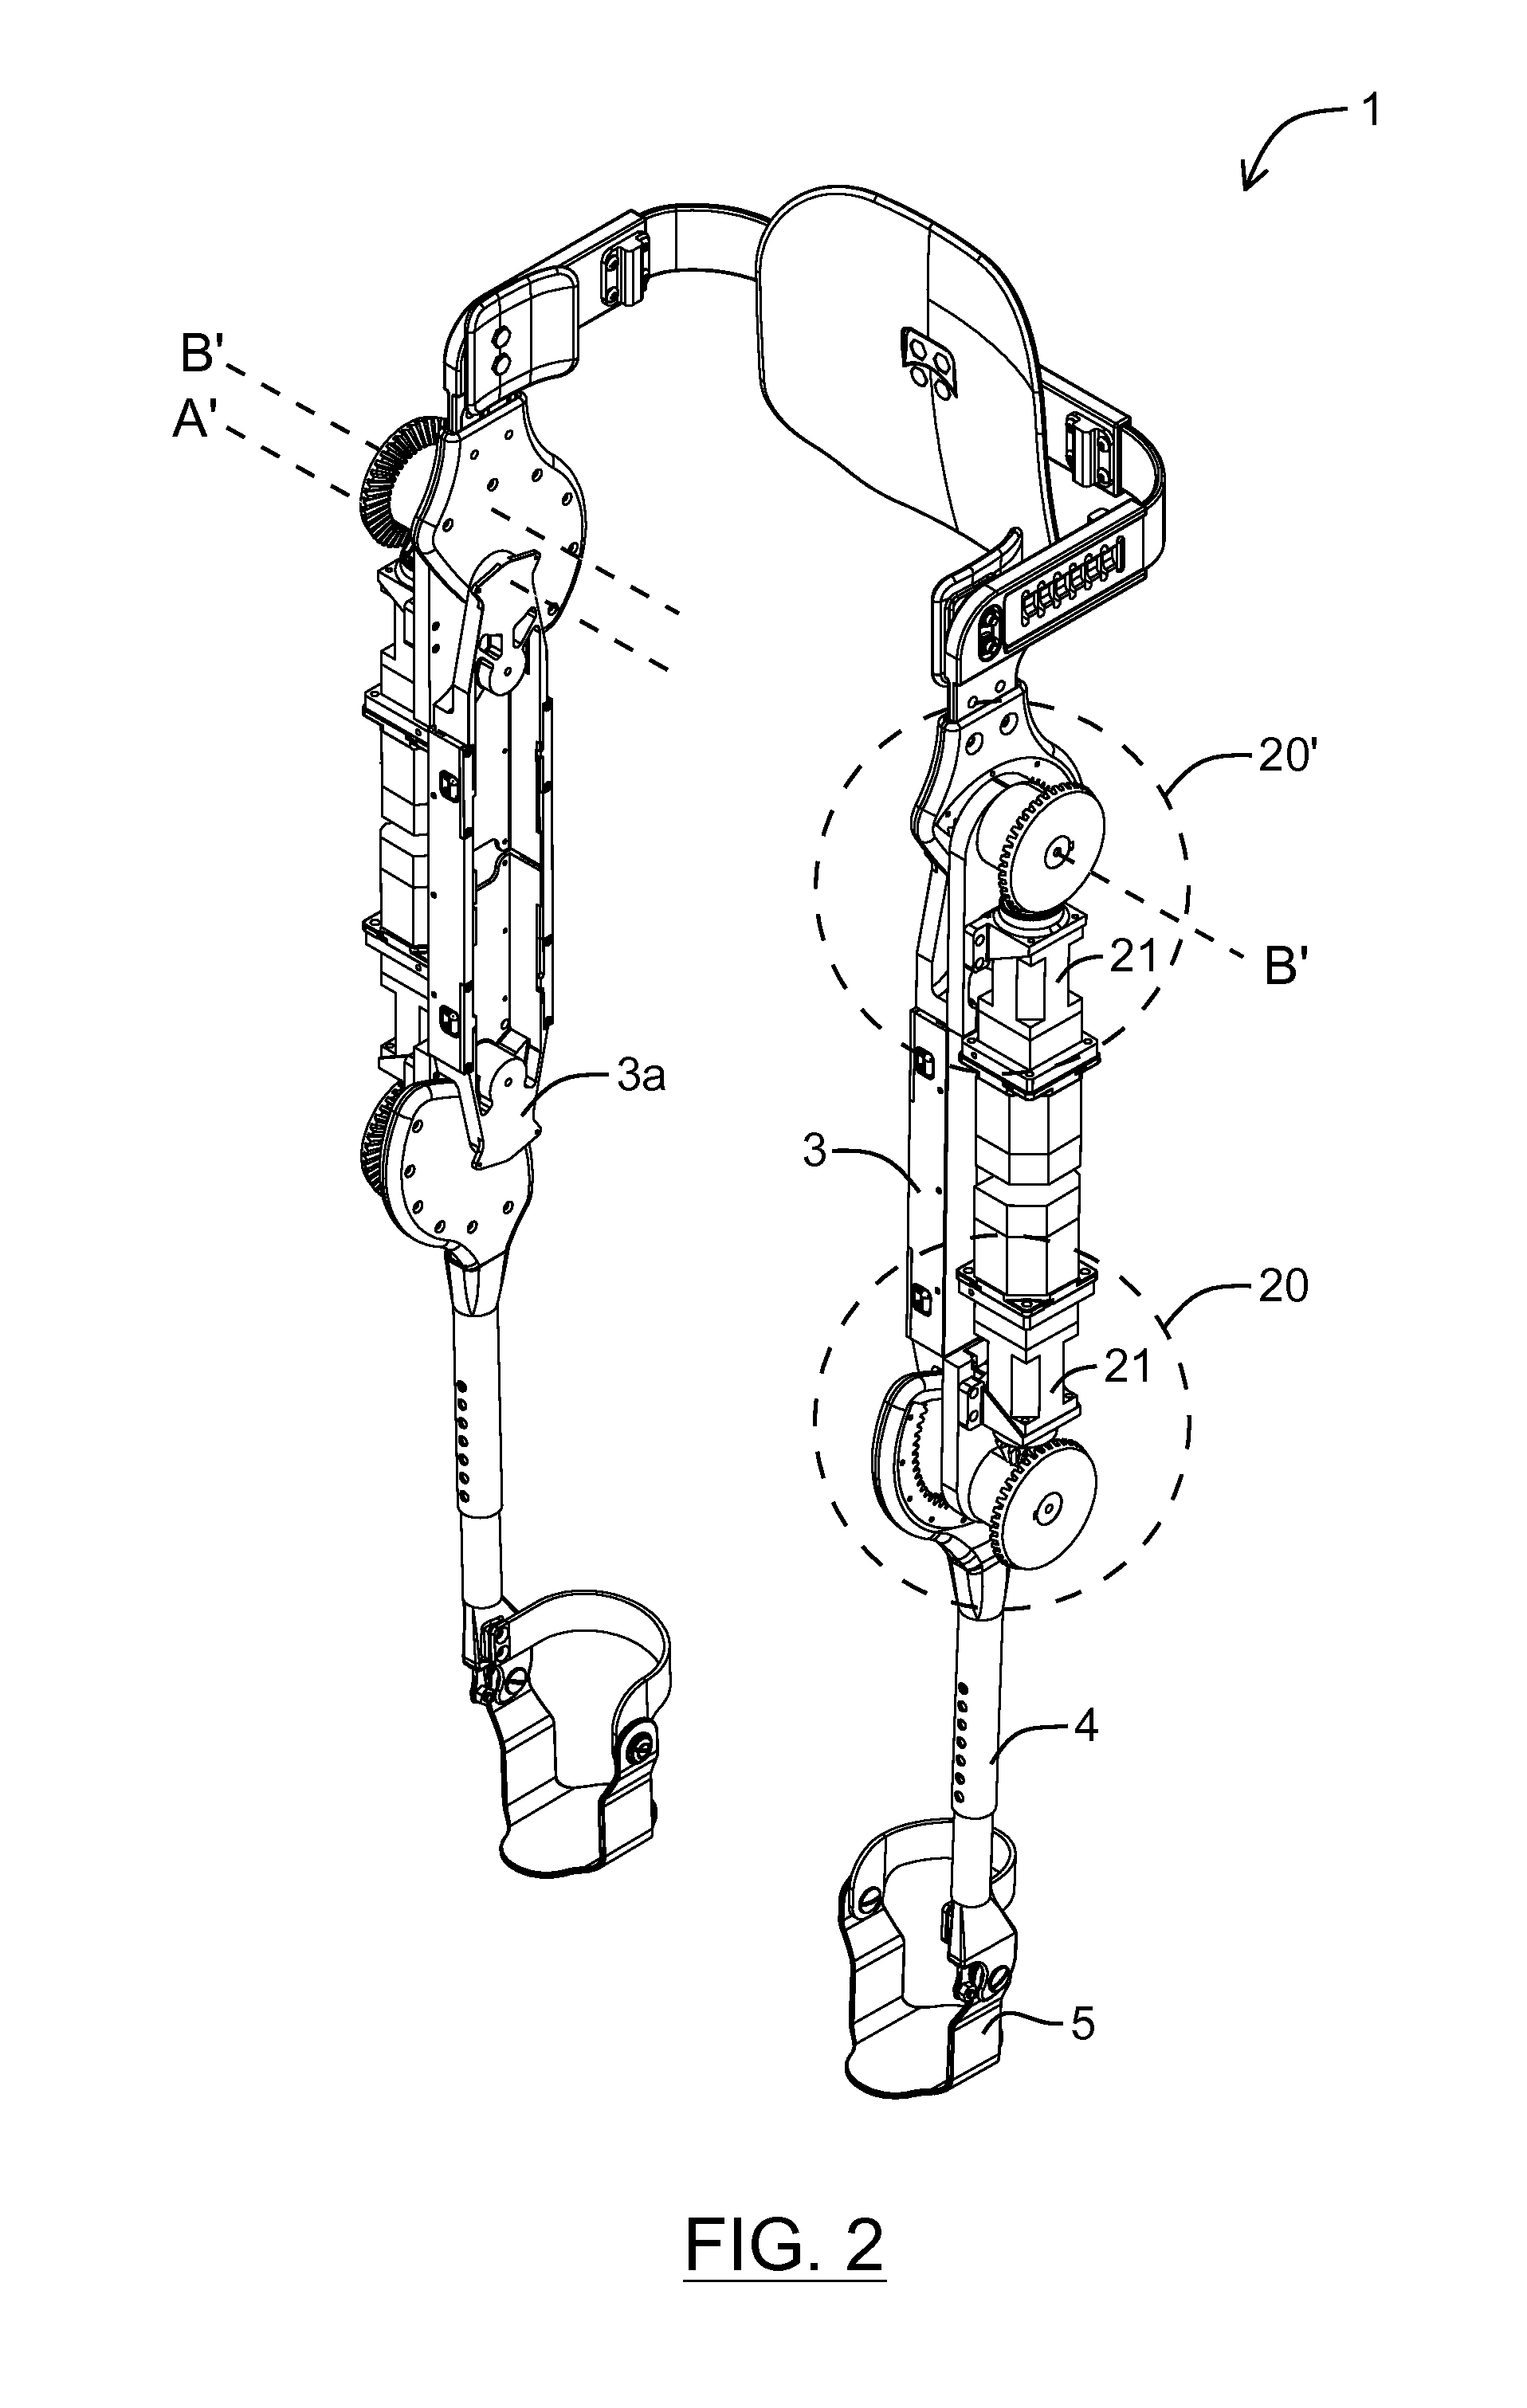 Strap assembly for use in an exoskeleton apparatus